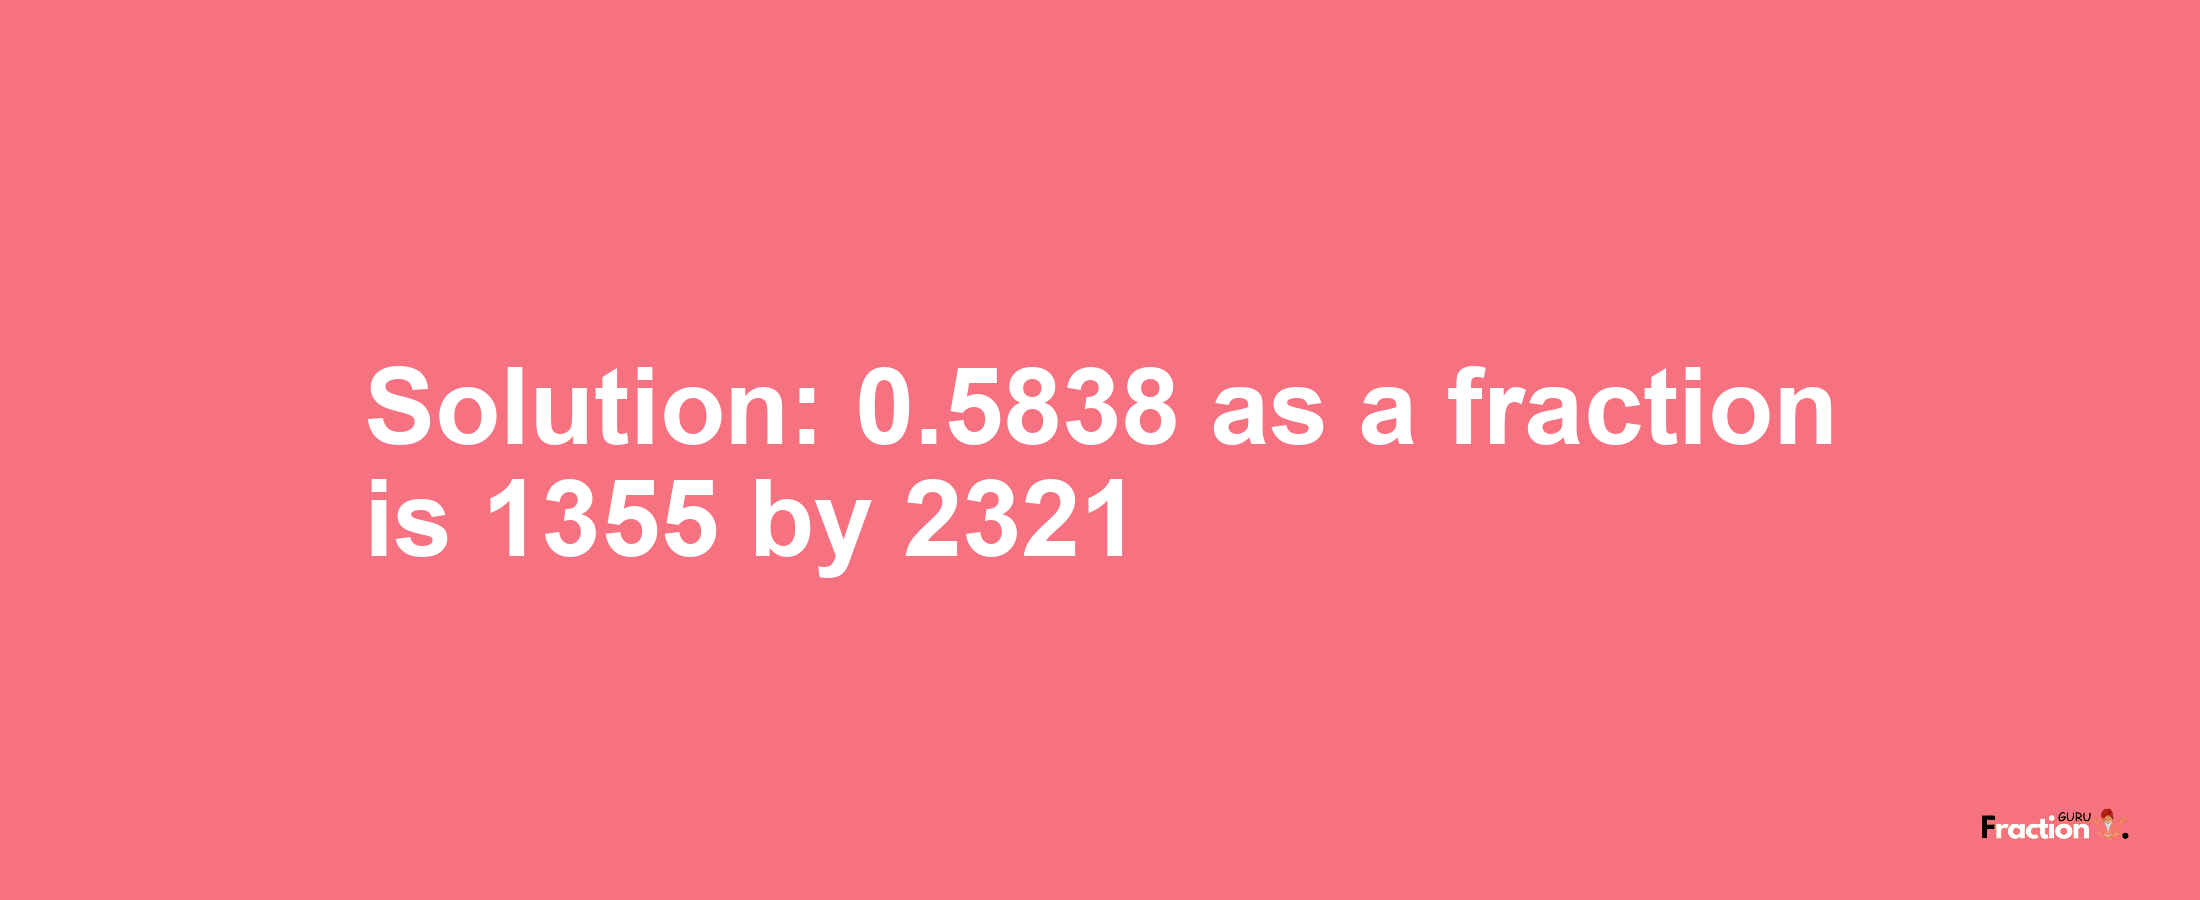 Solution:0.5838 as a fraction is 1355/2321